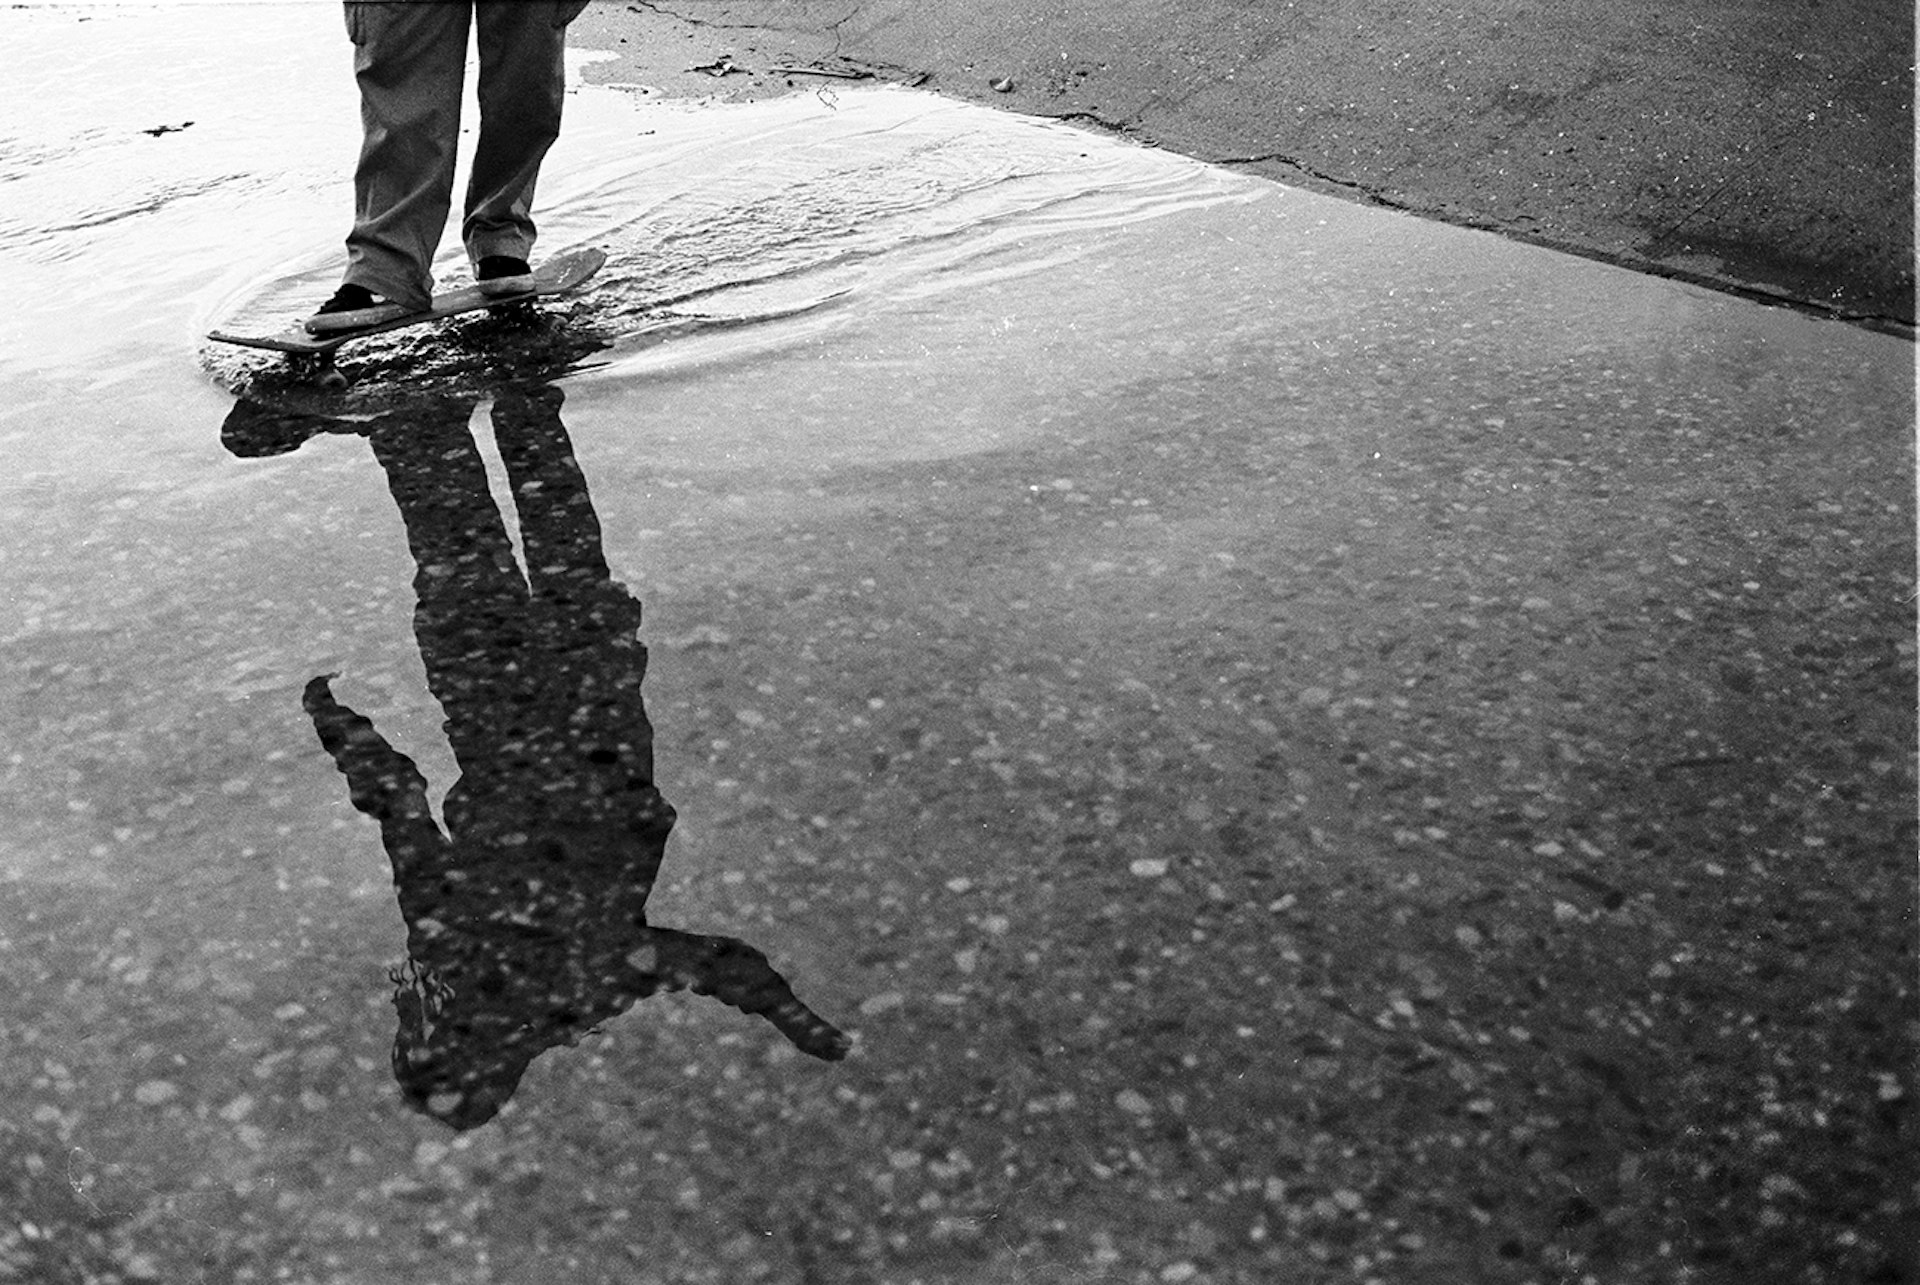 The reflection of a skateboarder in a puddle as they skate through